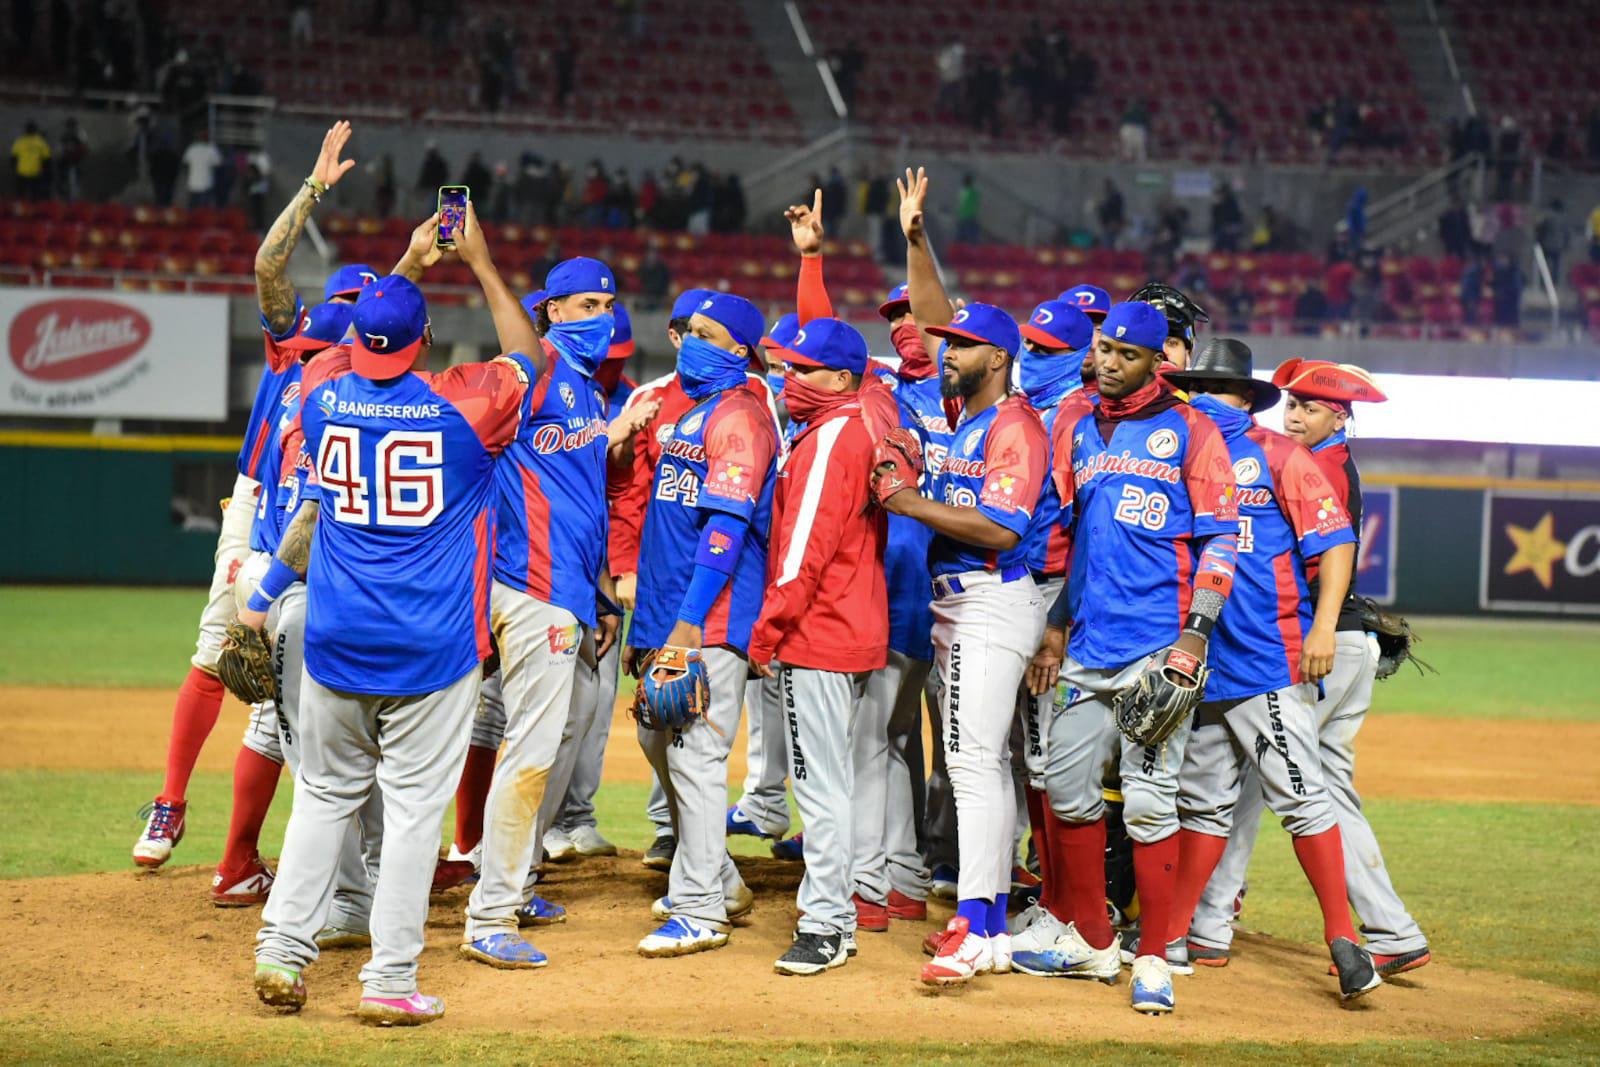 César Valdez wins the second Dominican victory in the Caribbean Series